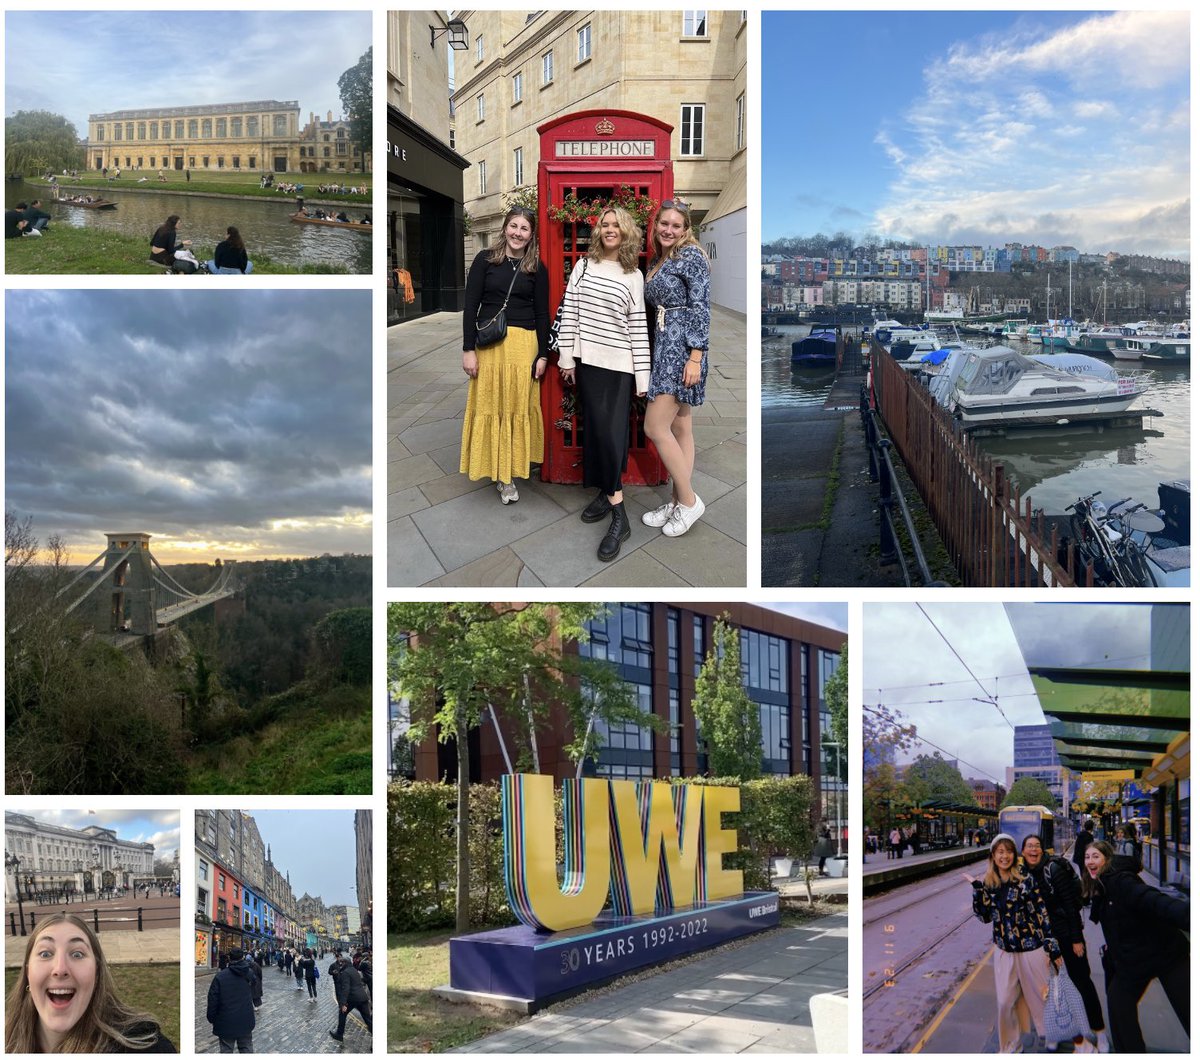 #MPlan candidate, Catherine Morris, has been on #exchange at the University of West England (UWE) in Bristol, taking part in their papers on plan making, transport policy, & renewable energy. Thanks @OtagoIntOffice & Te Iho Whenua for making it possible!